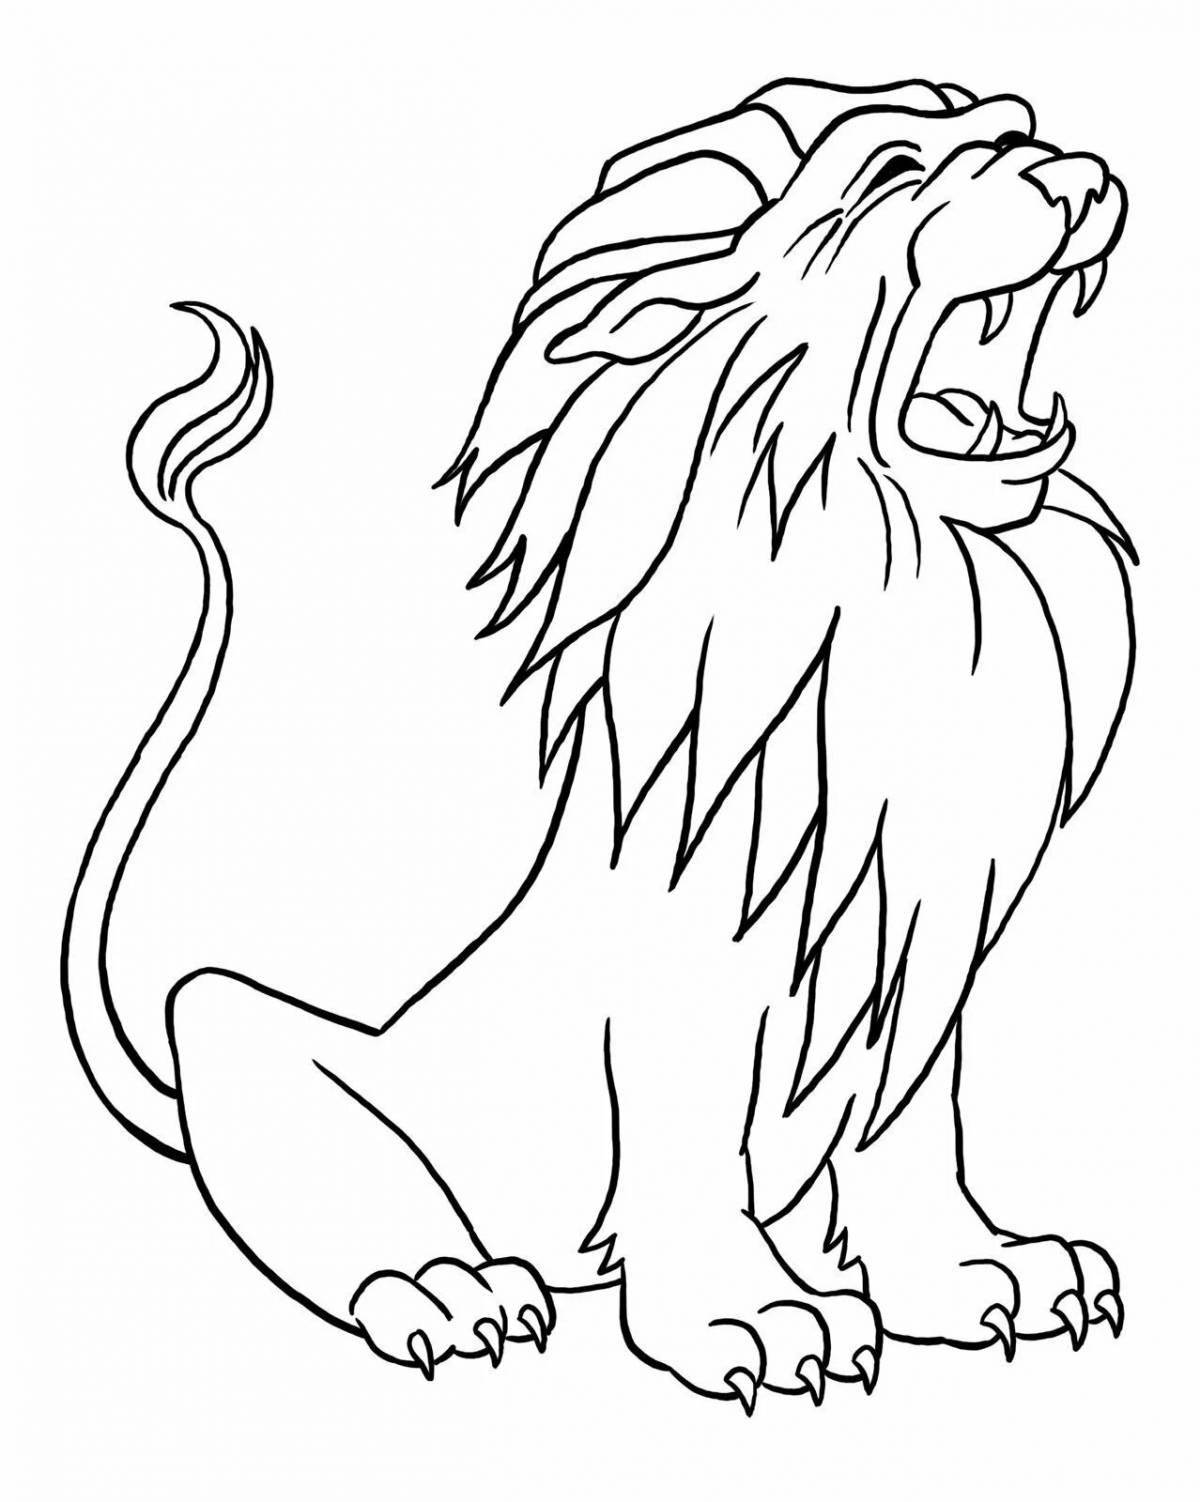 Fun drawing of a lion for kids